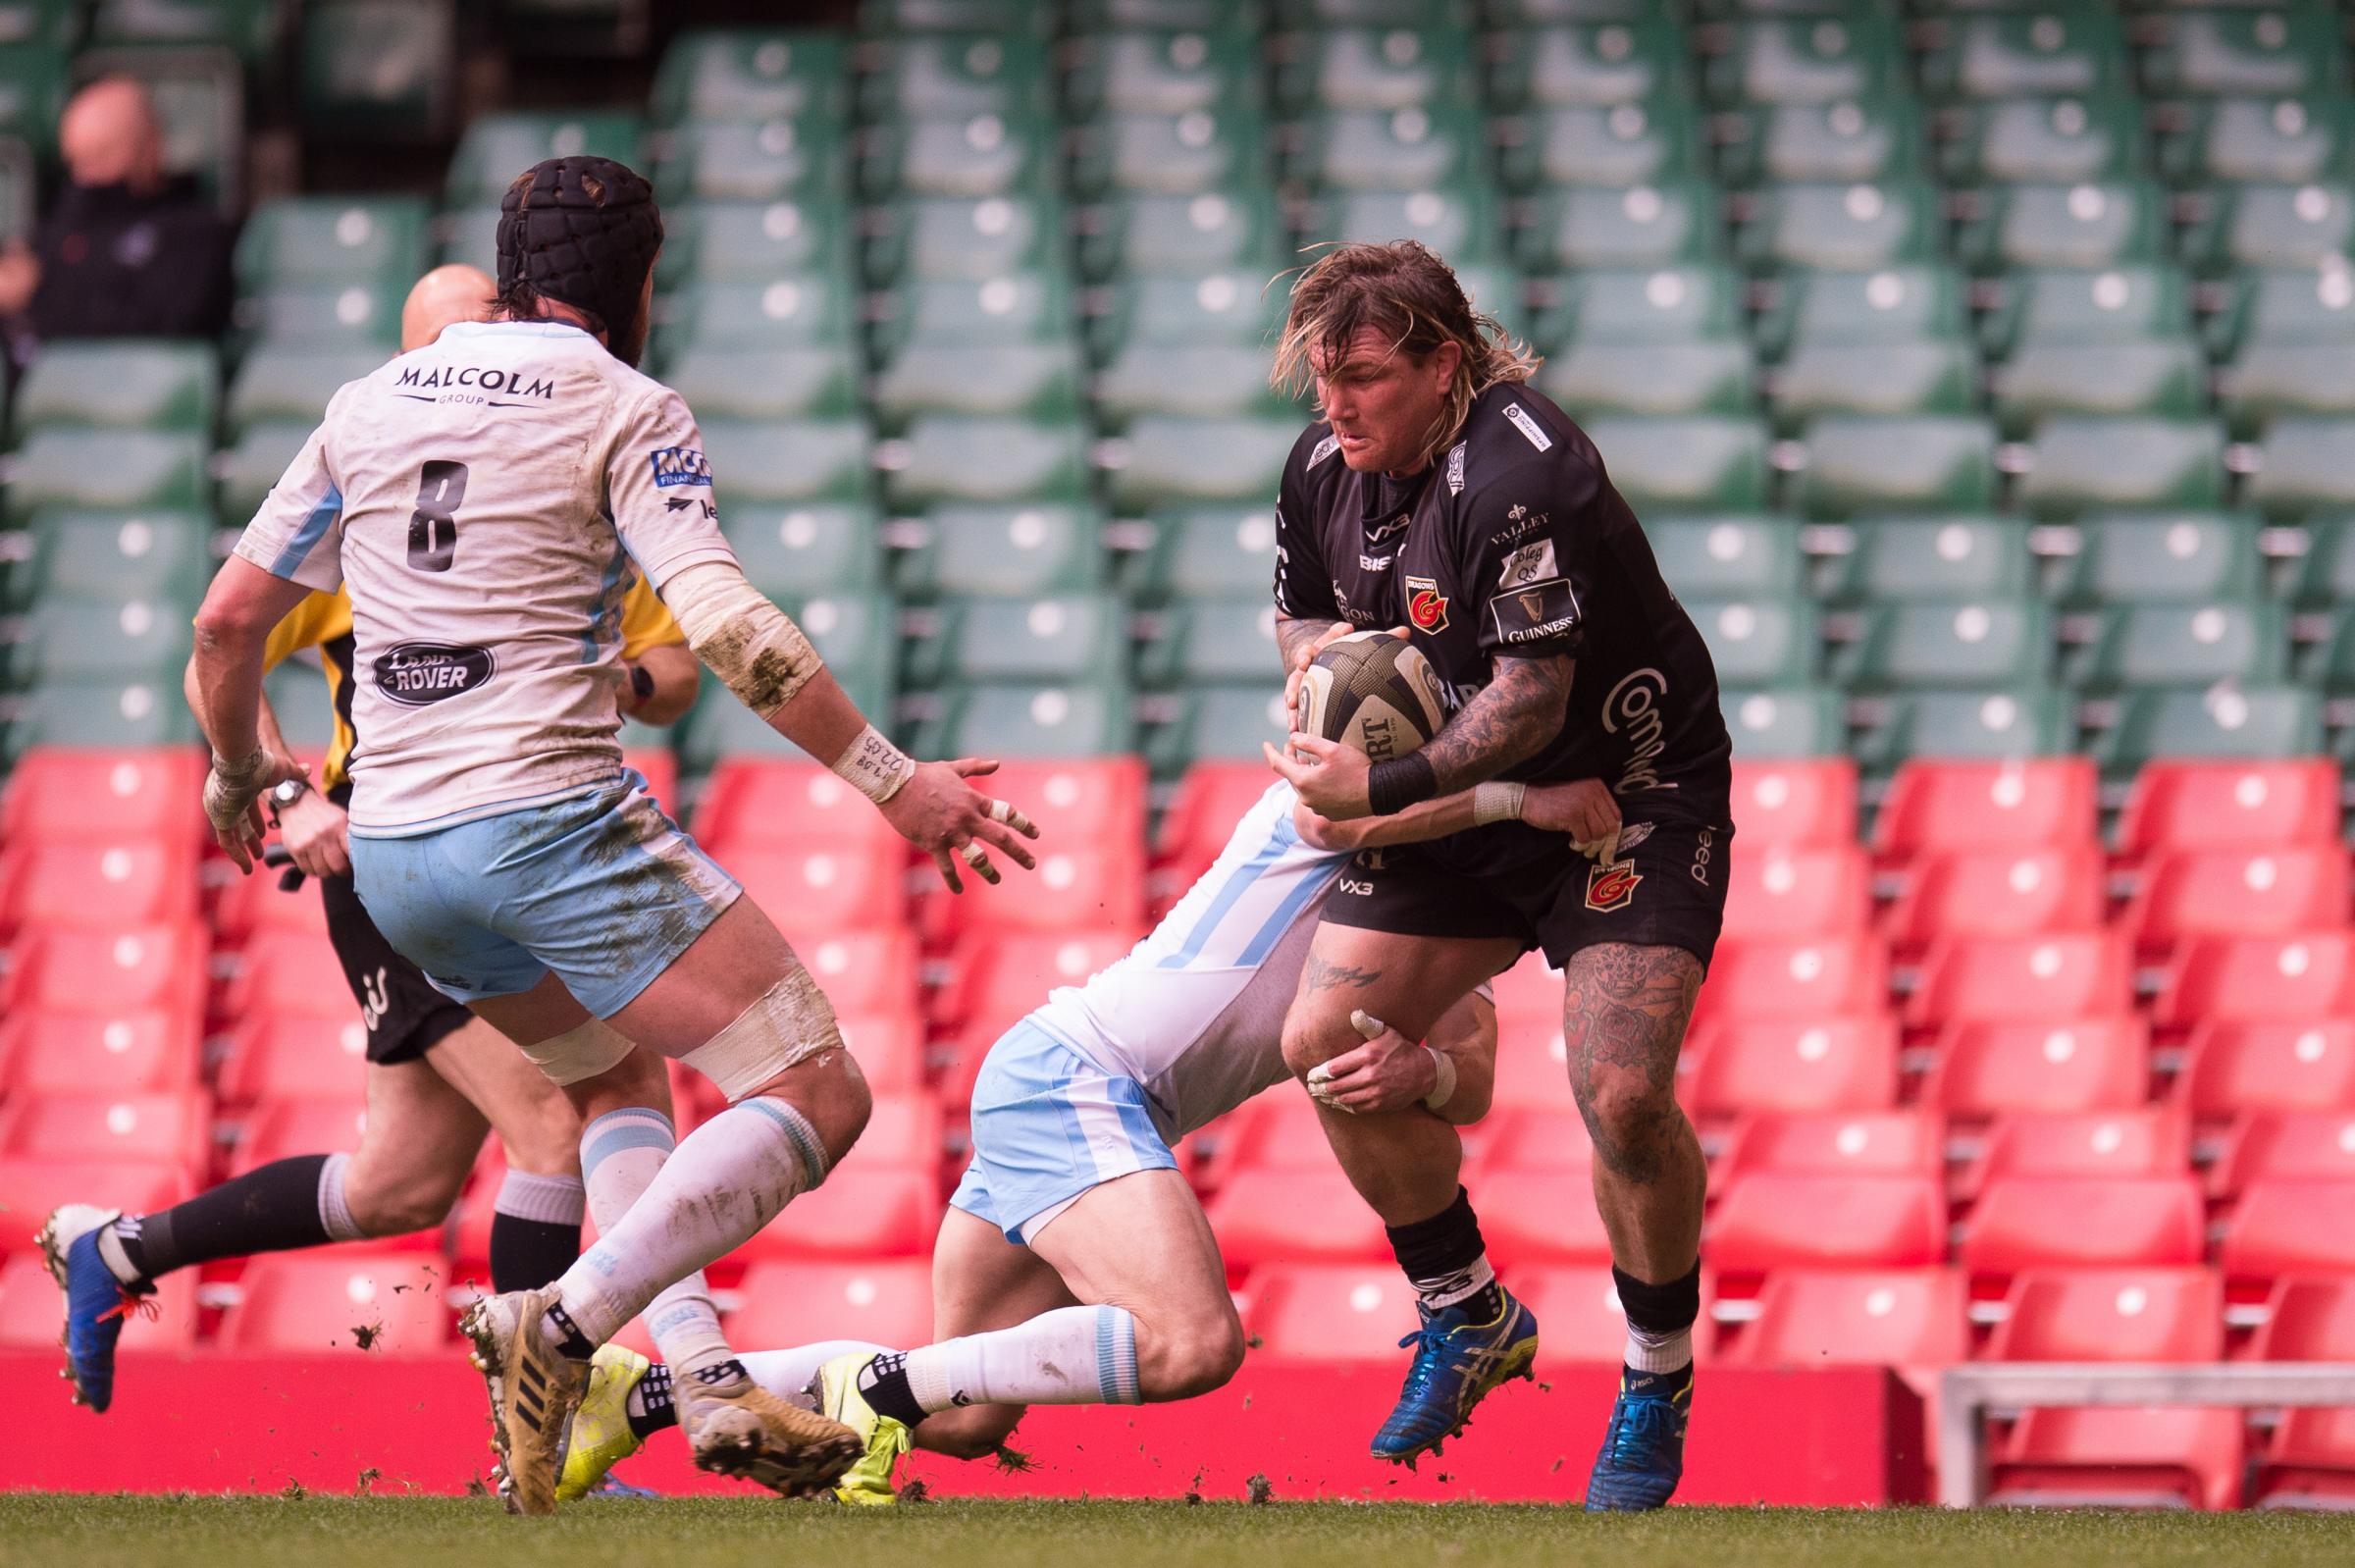 Richard Hibbard of Dragons is tackled by Sean Kennedy of Glasgow Warriors